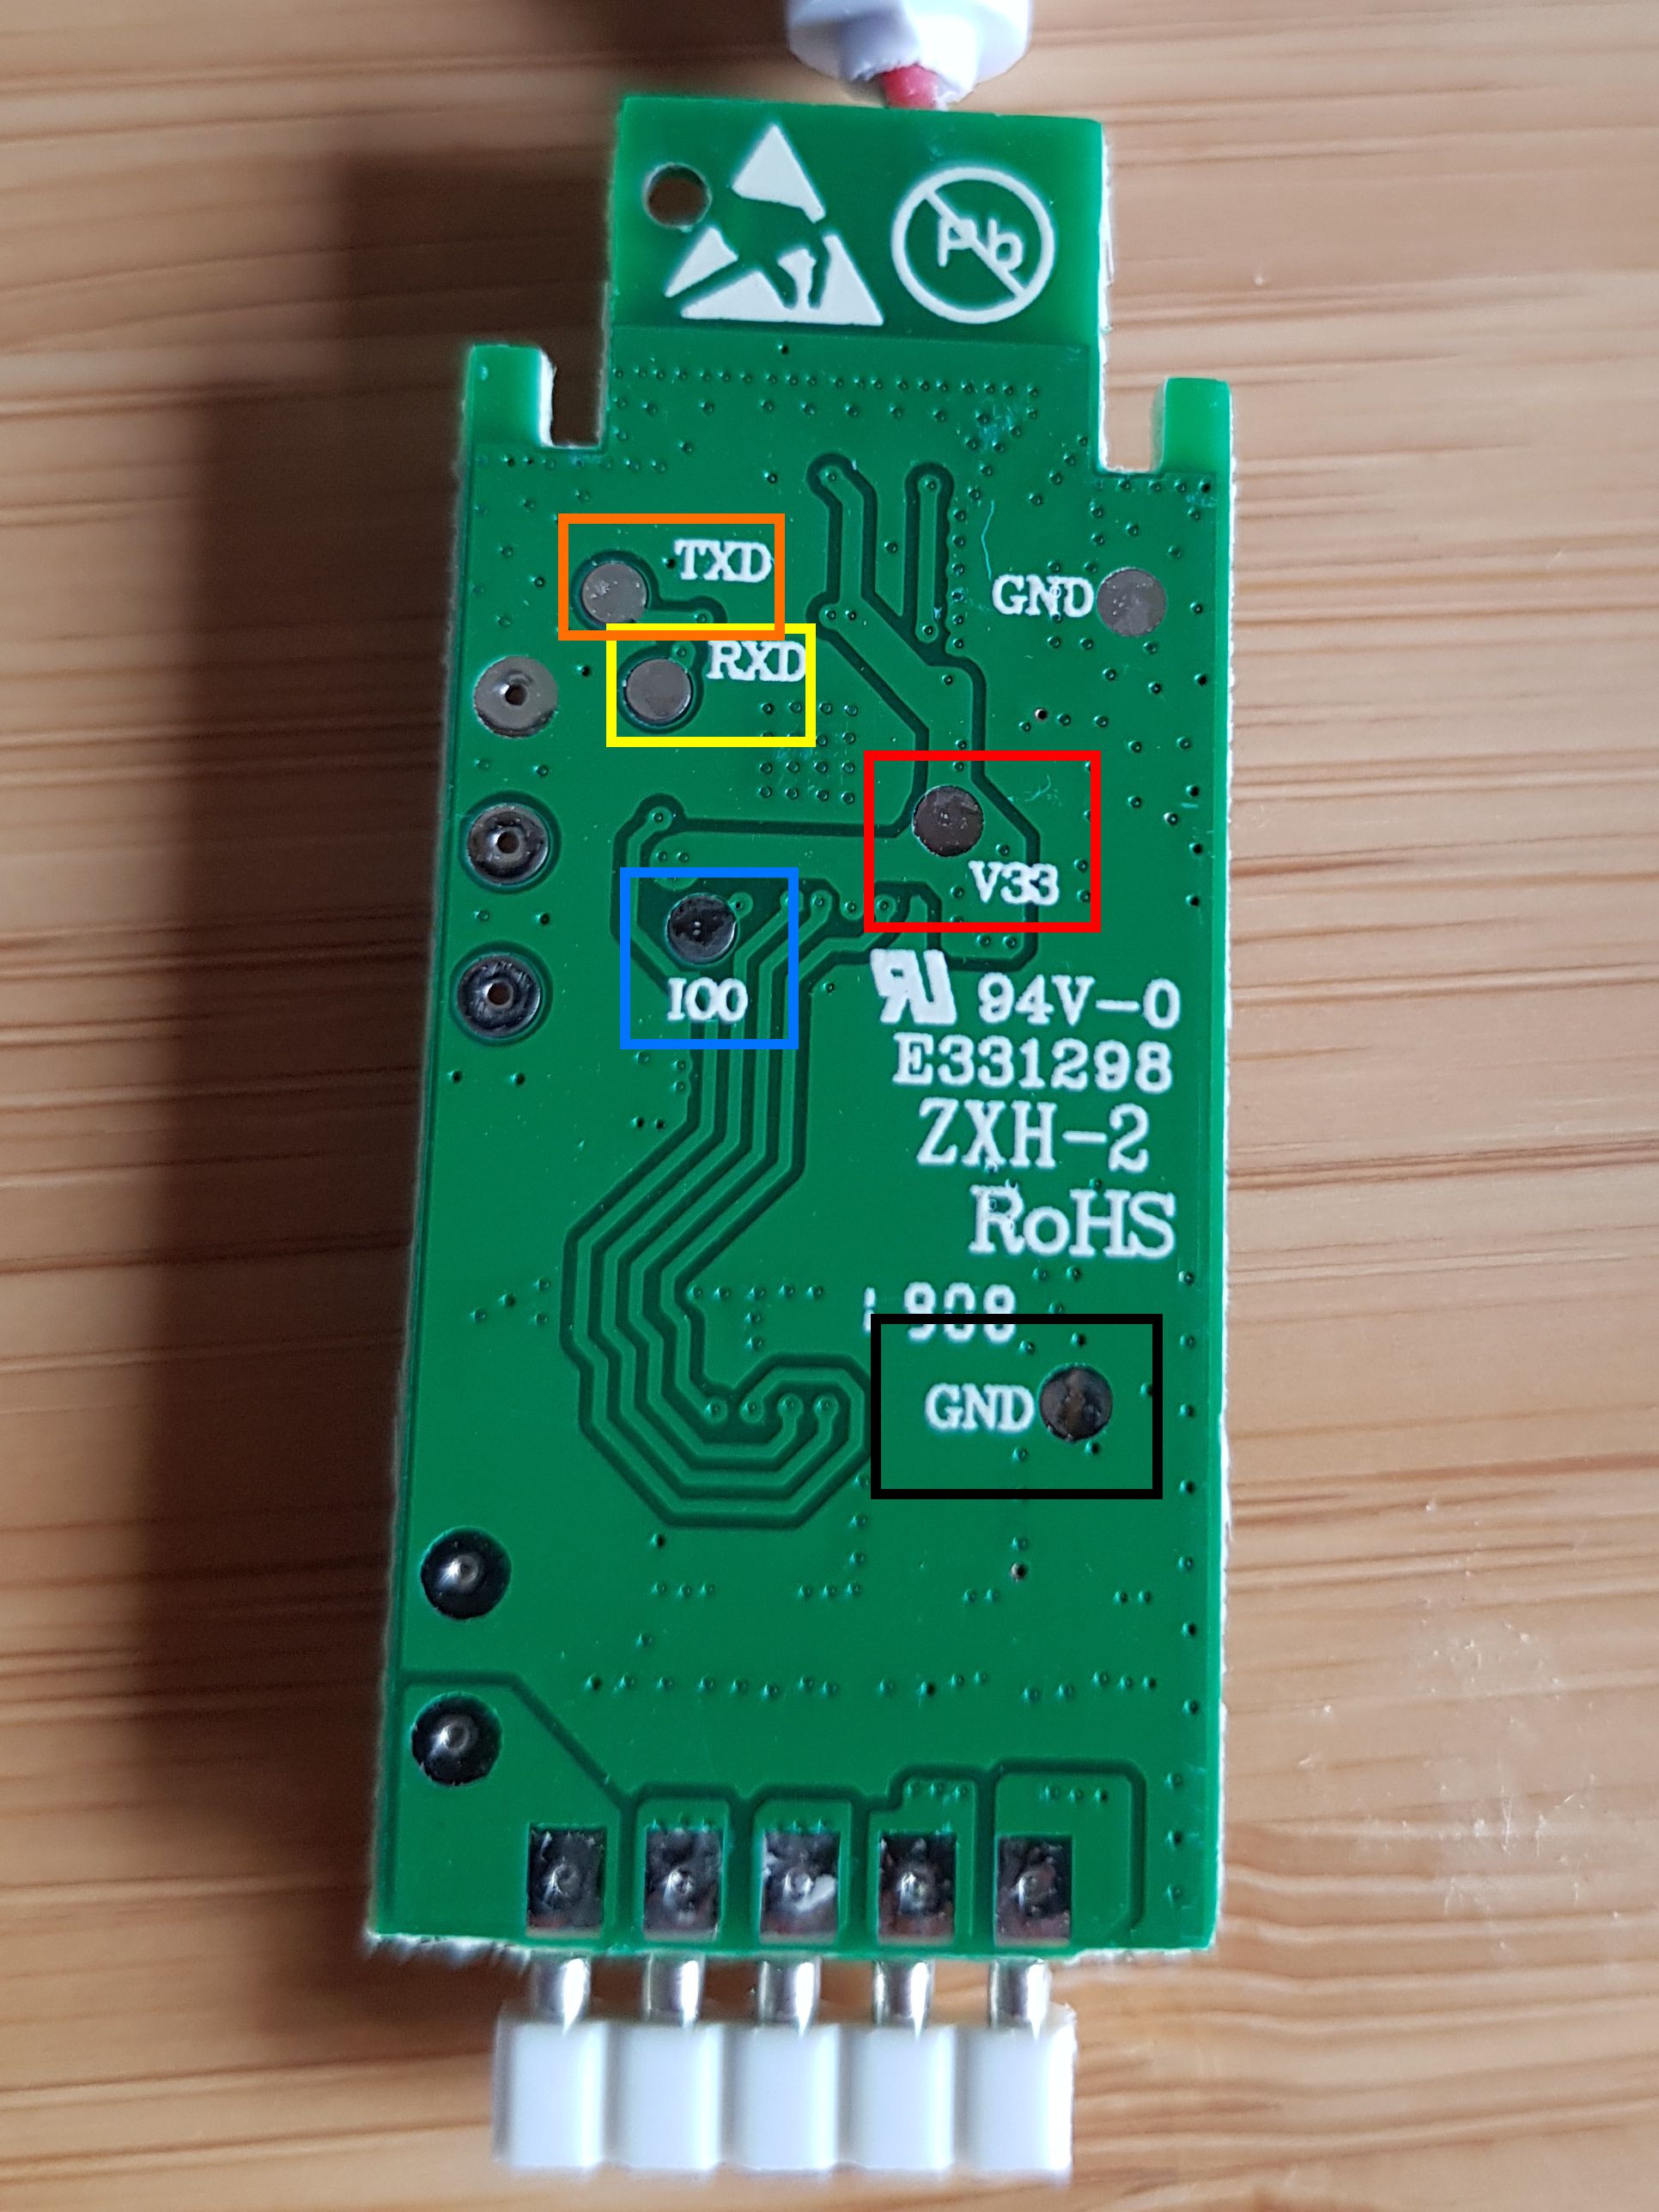 Magic Home PCB with connections outlined